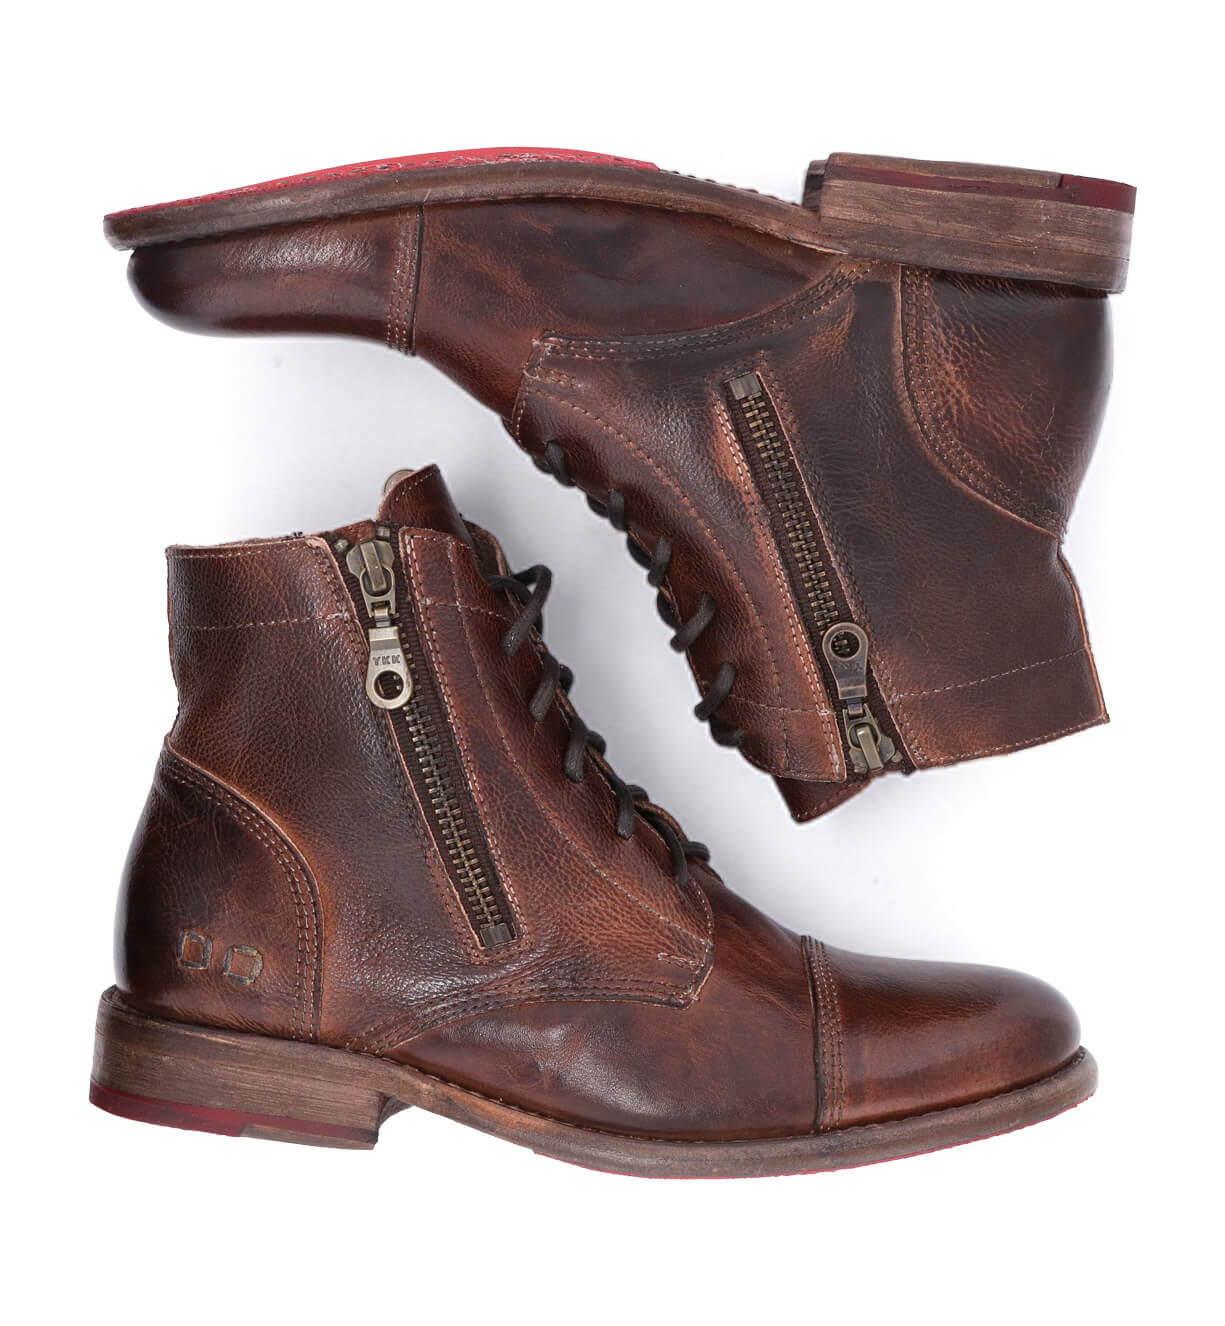 A pair of Bonnie by Bed Stu lace-up brown leather combat ankle boots.